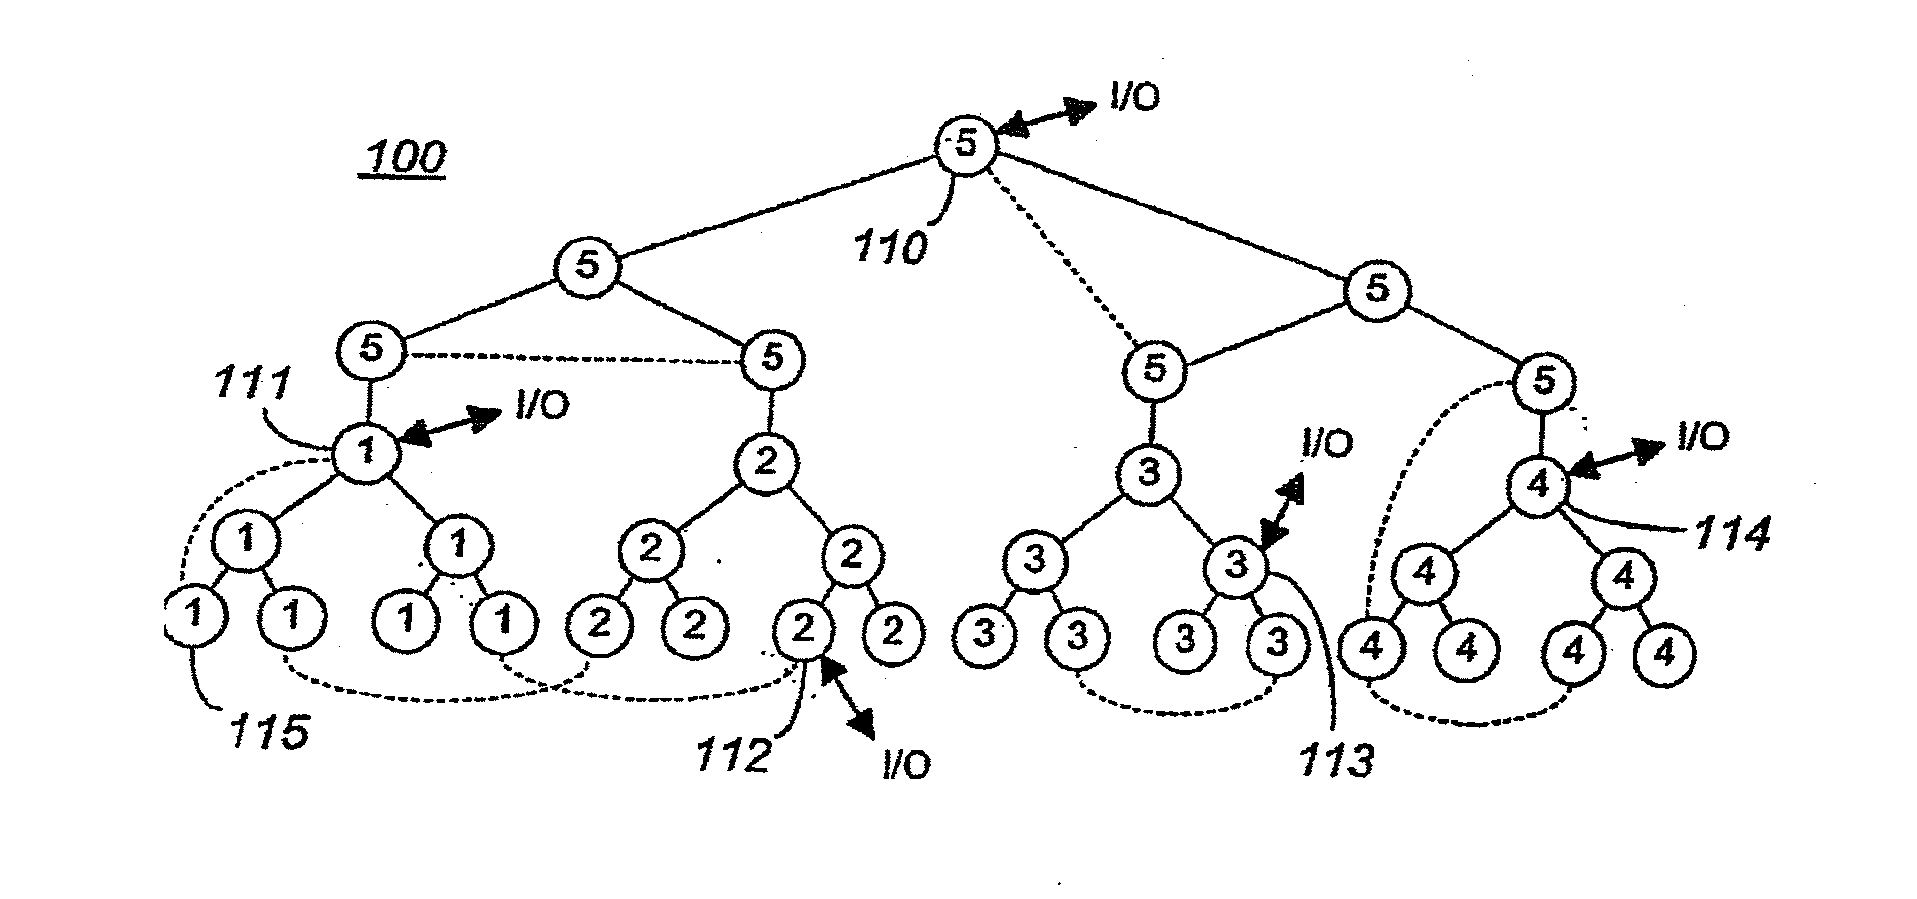 Collective network for computer structures